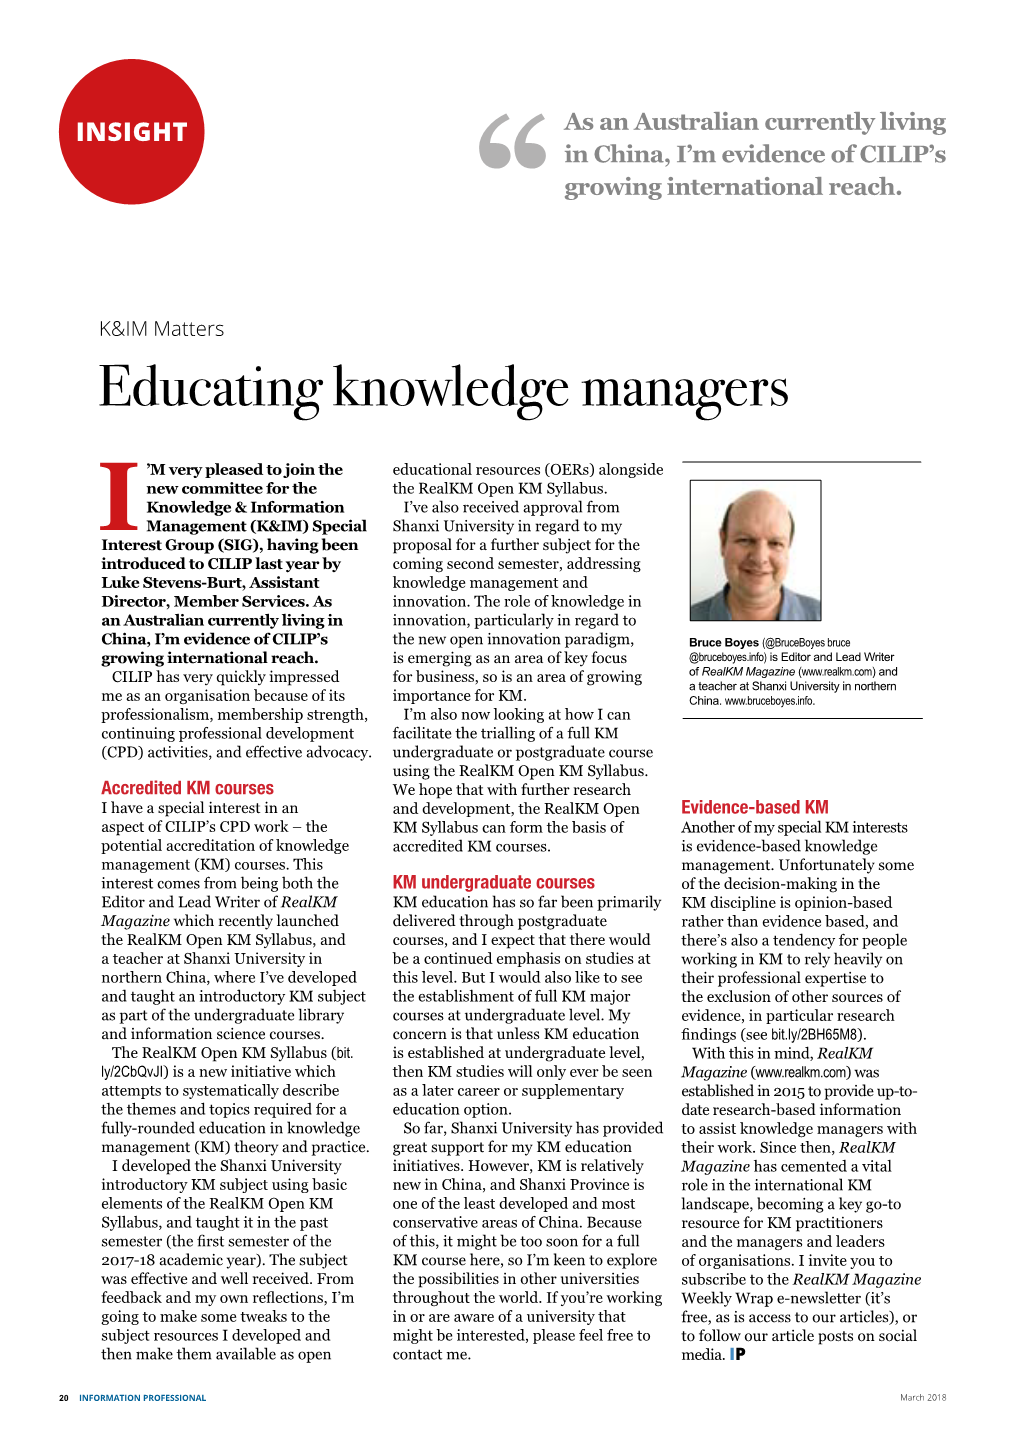 Educating Knowledge Managers